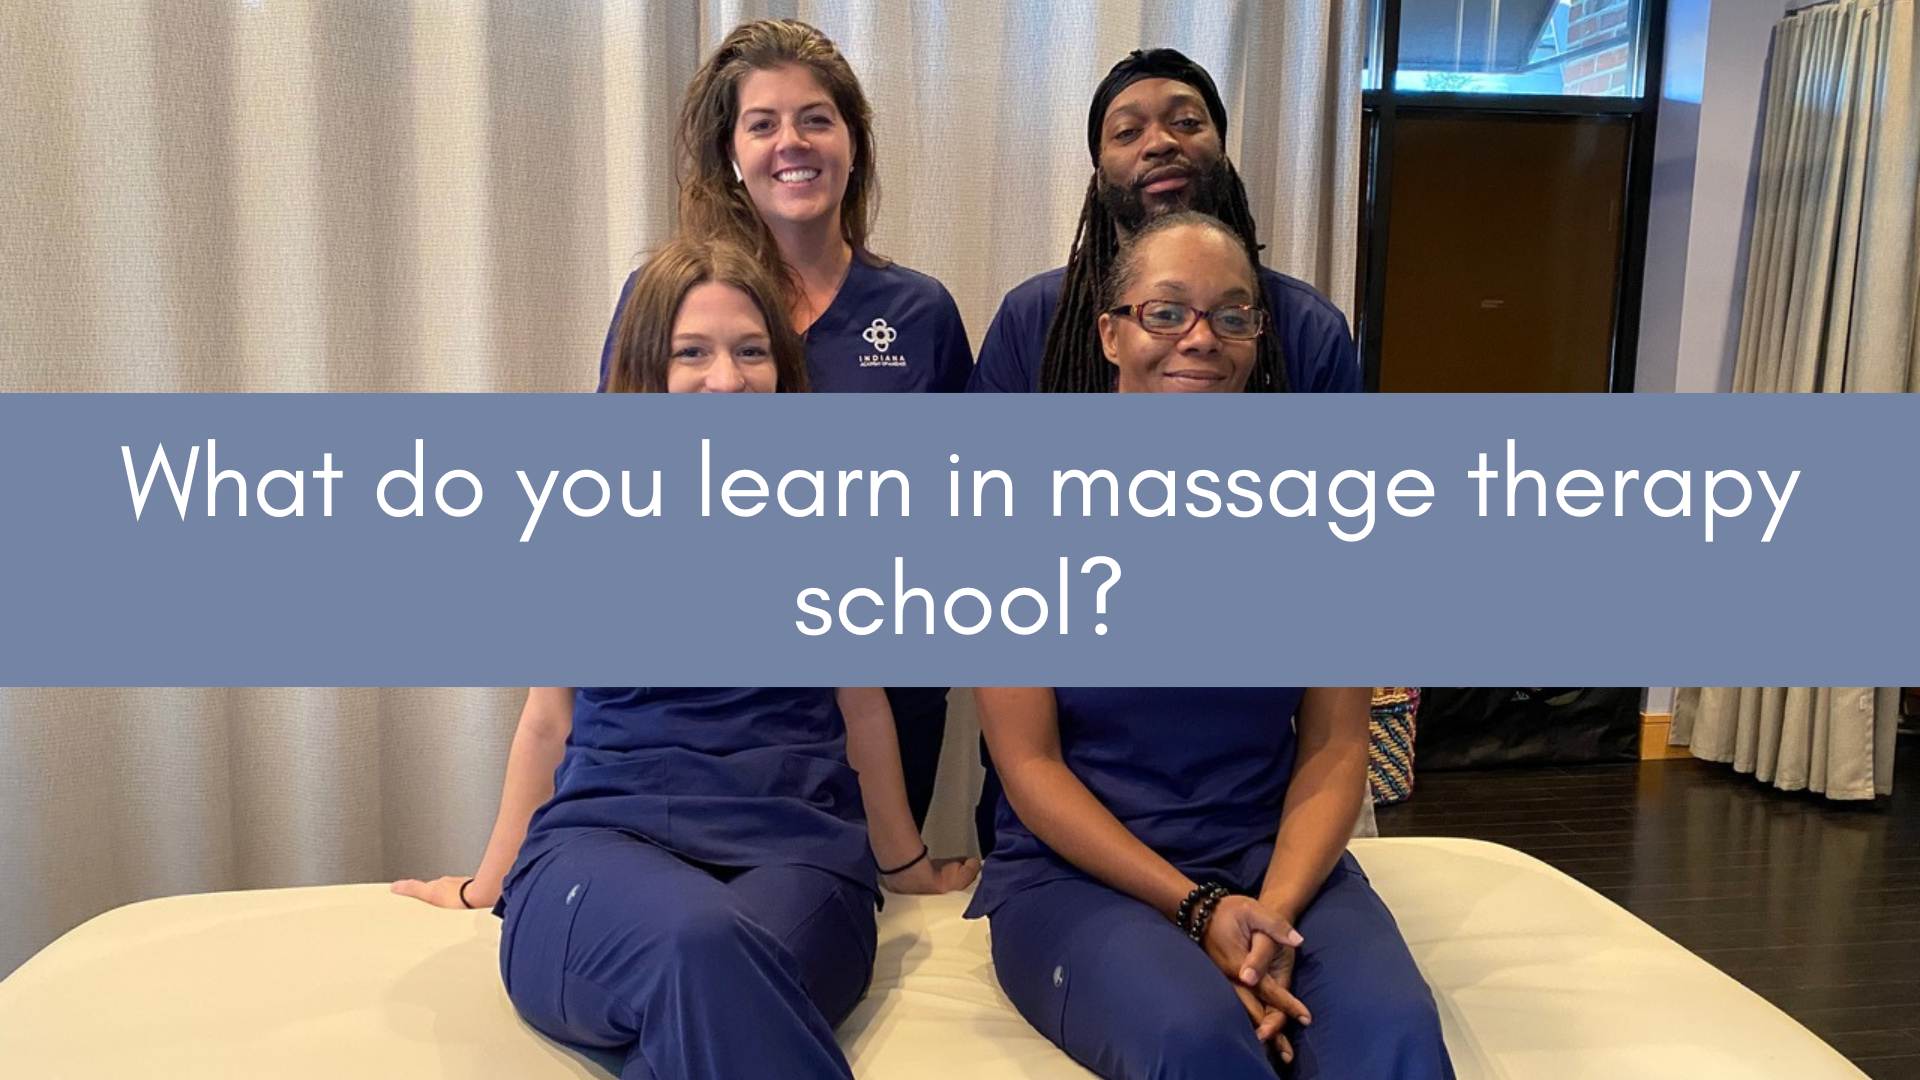 What do you learn in massage therapy school?